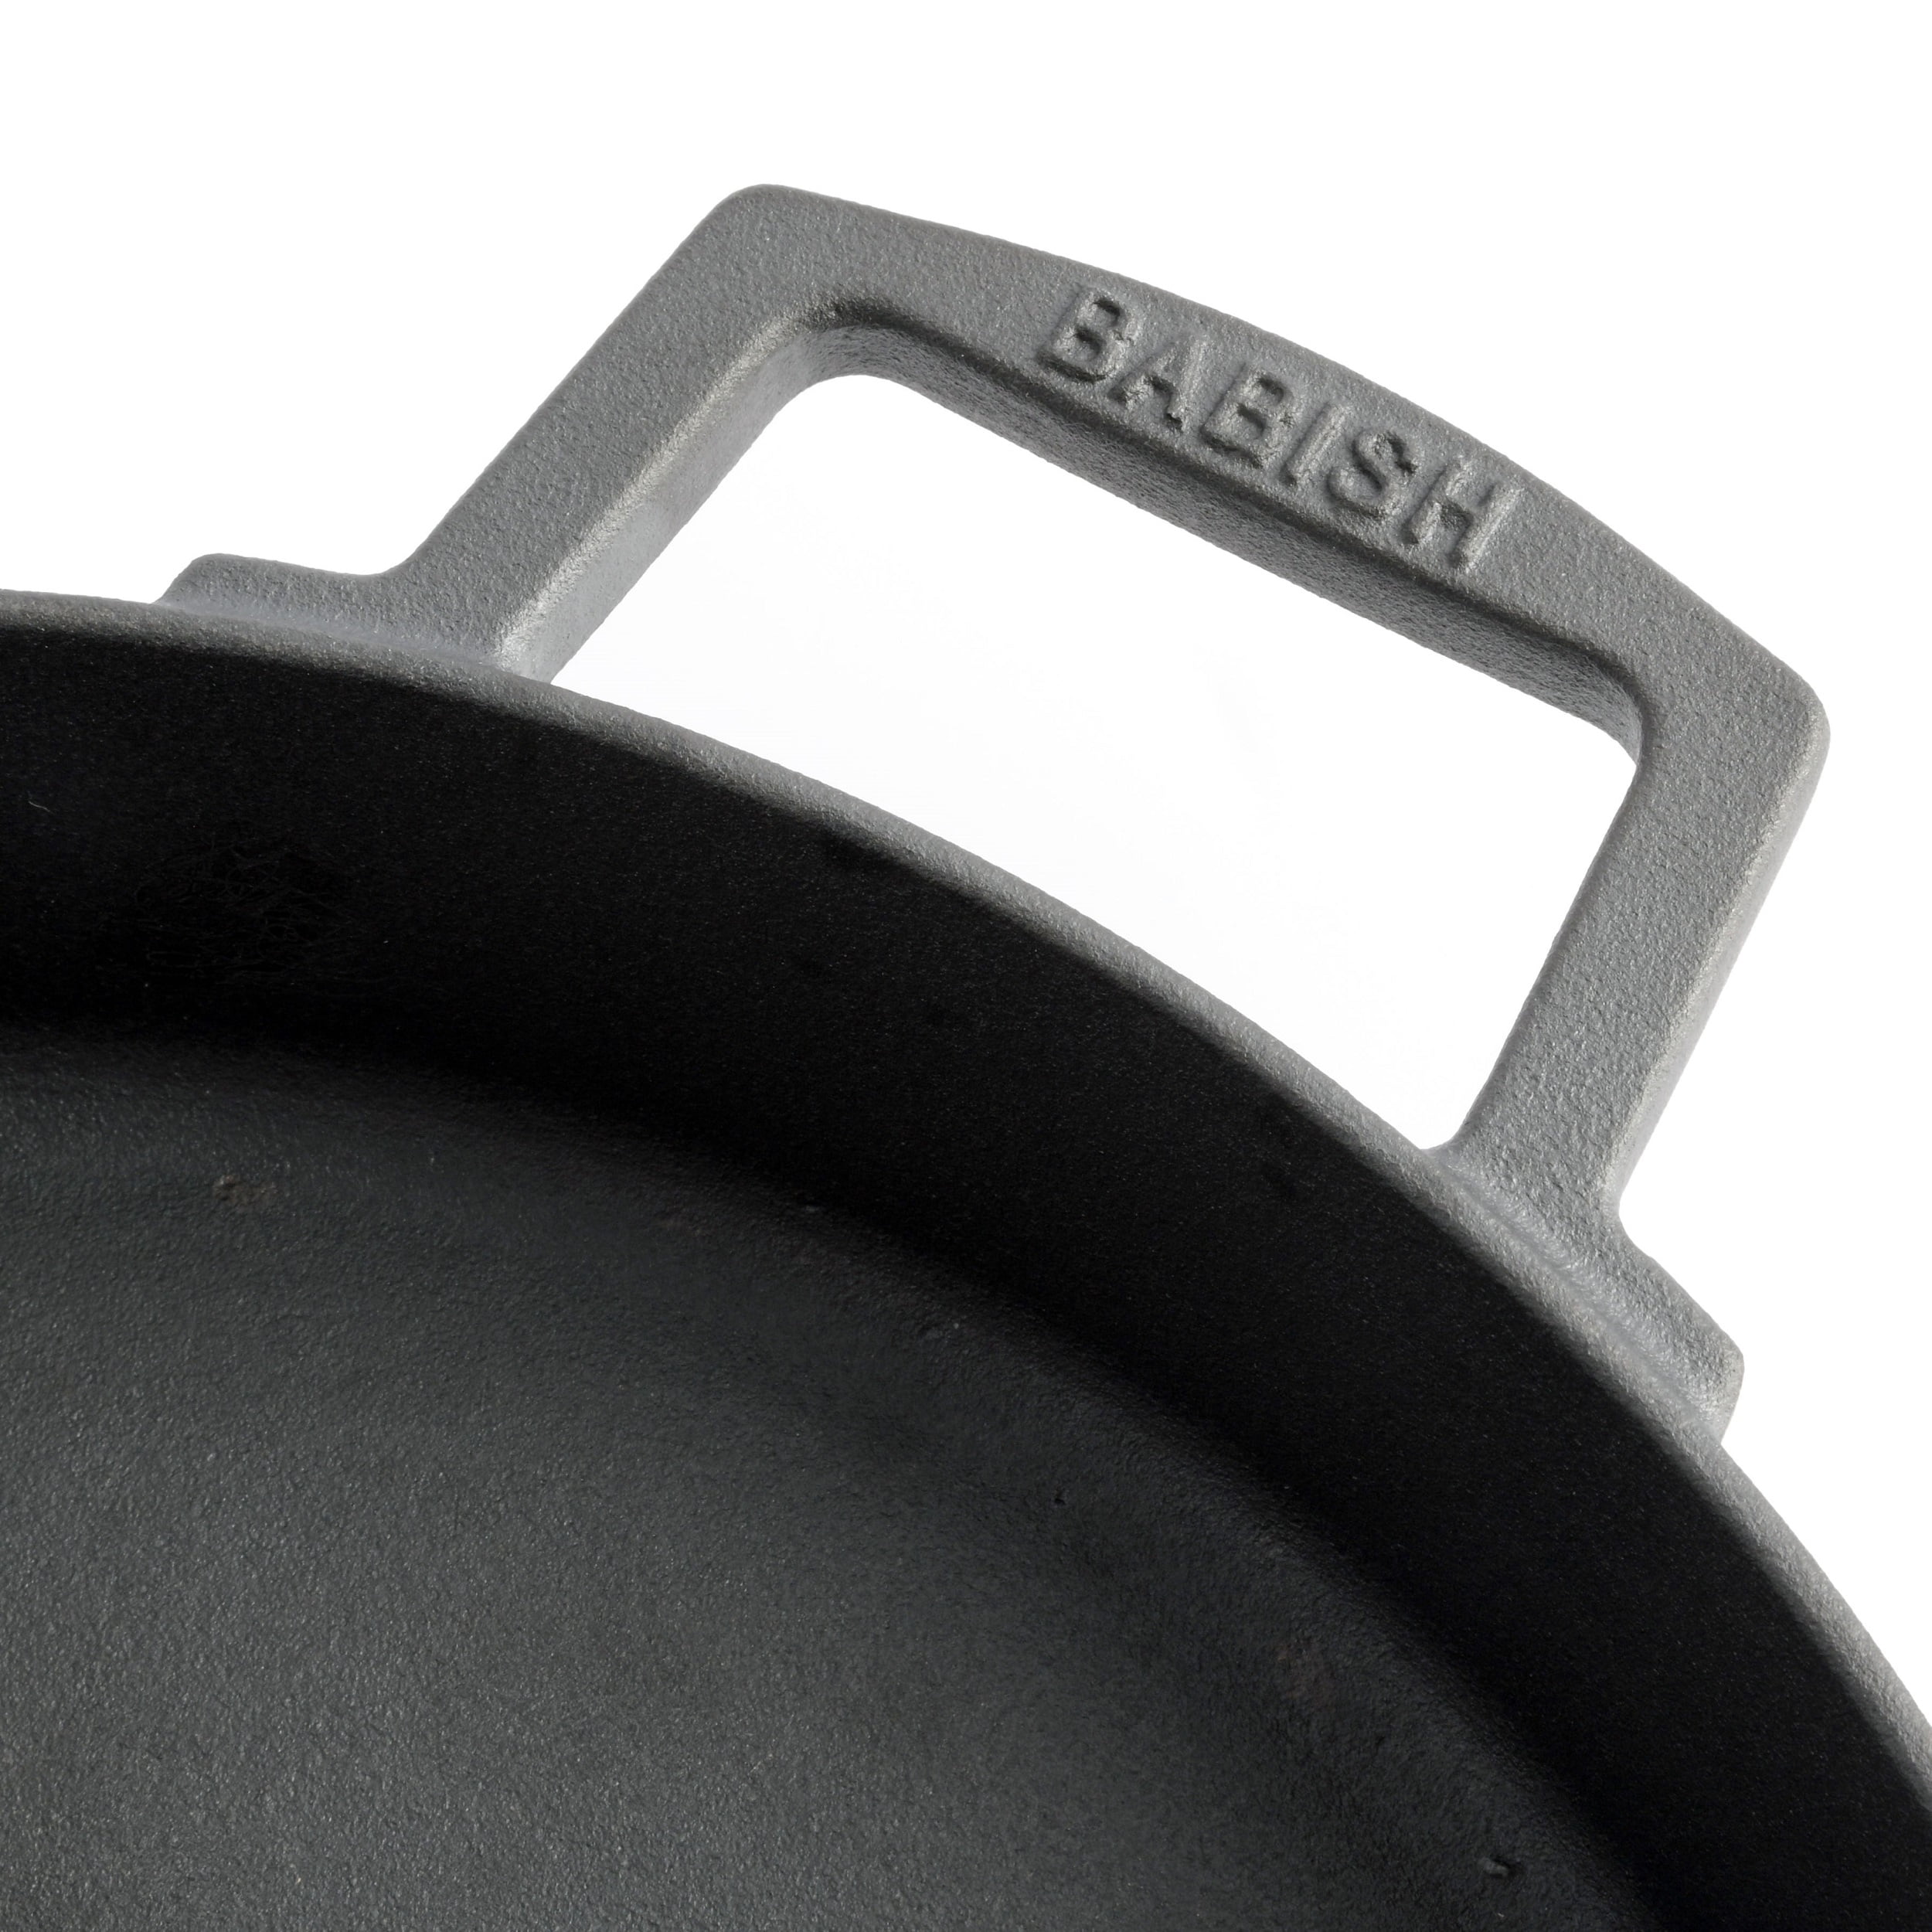 Breaking News: Certain items of Babish Cookware are available in select  Meijer stores now. Call your local store and ask if Babish Cookware…